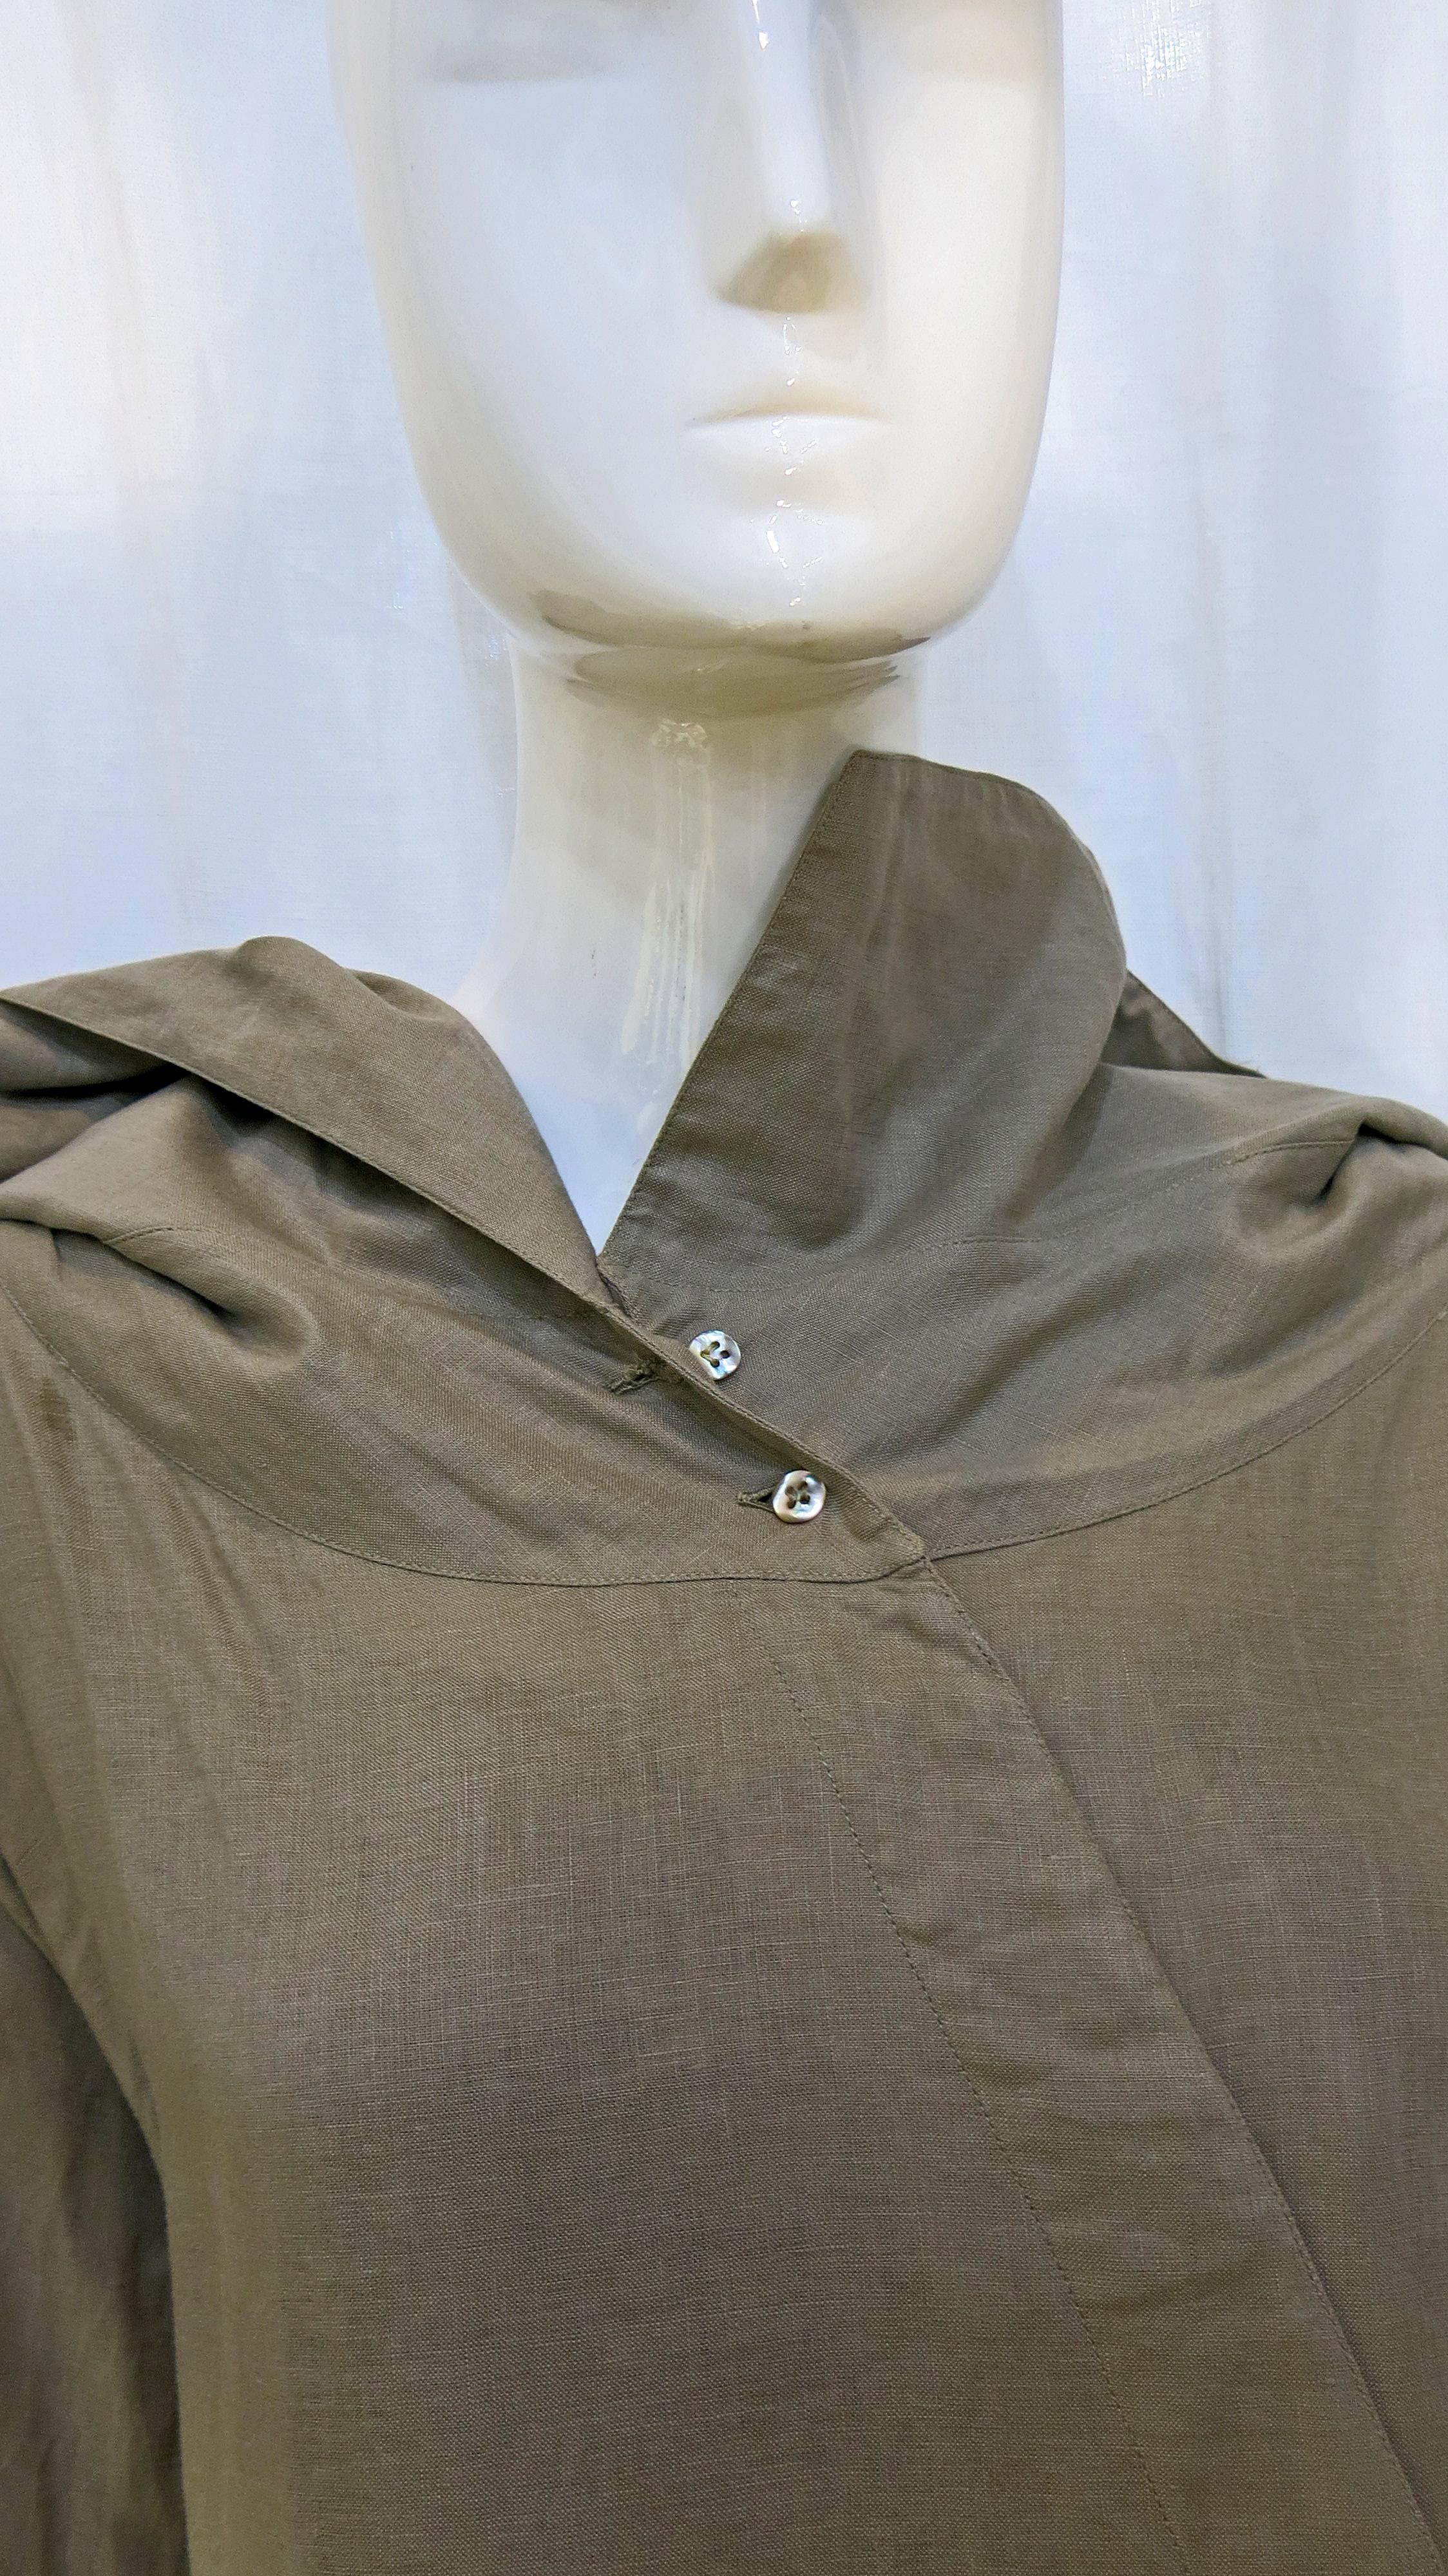 Gray linen blouse with asymmetric hidden buttons. Collar is oversized and also asymmetric with the right side being longer than the left. Long sleeved with four mother of pearl buttons at the cuff of each sleeve. Seam running down the back of the